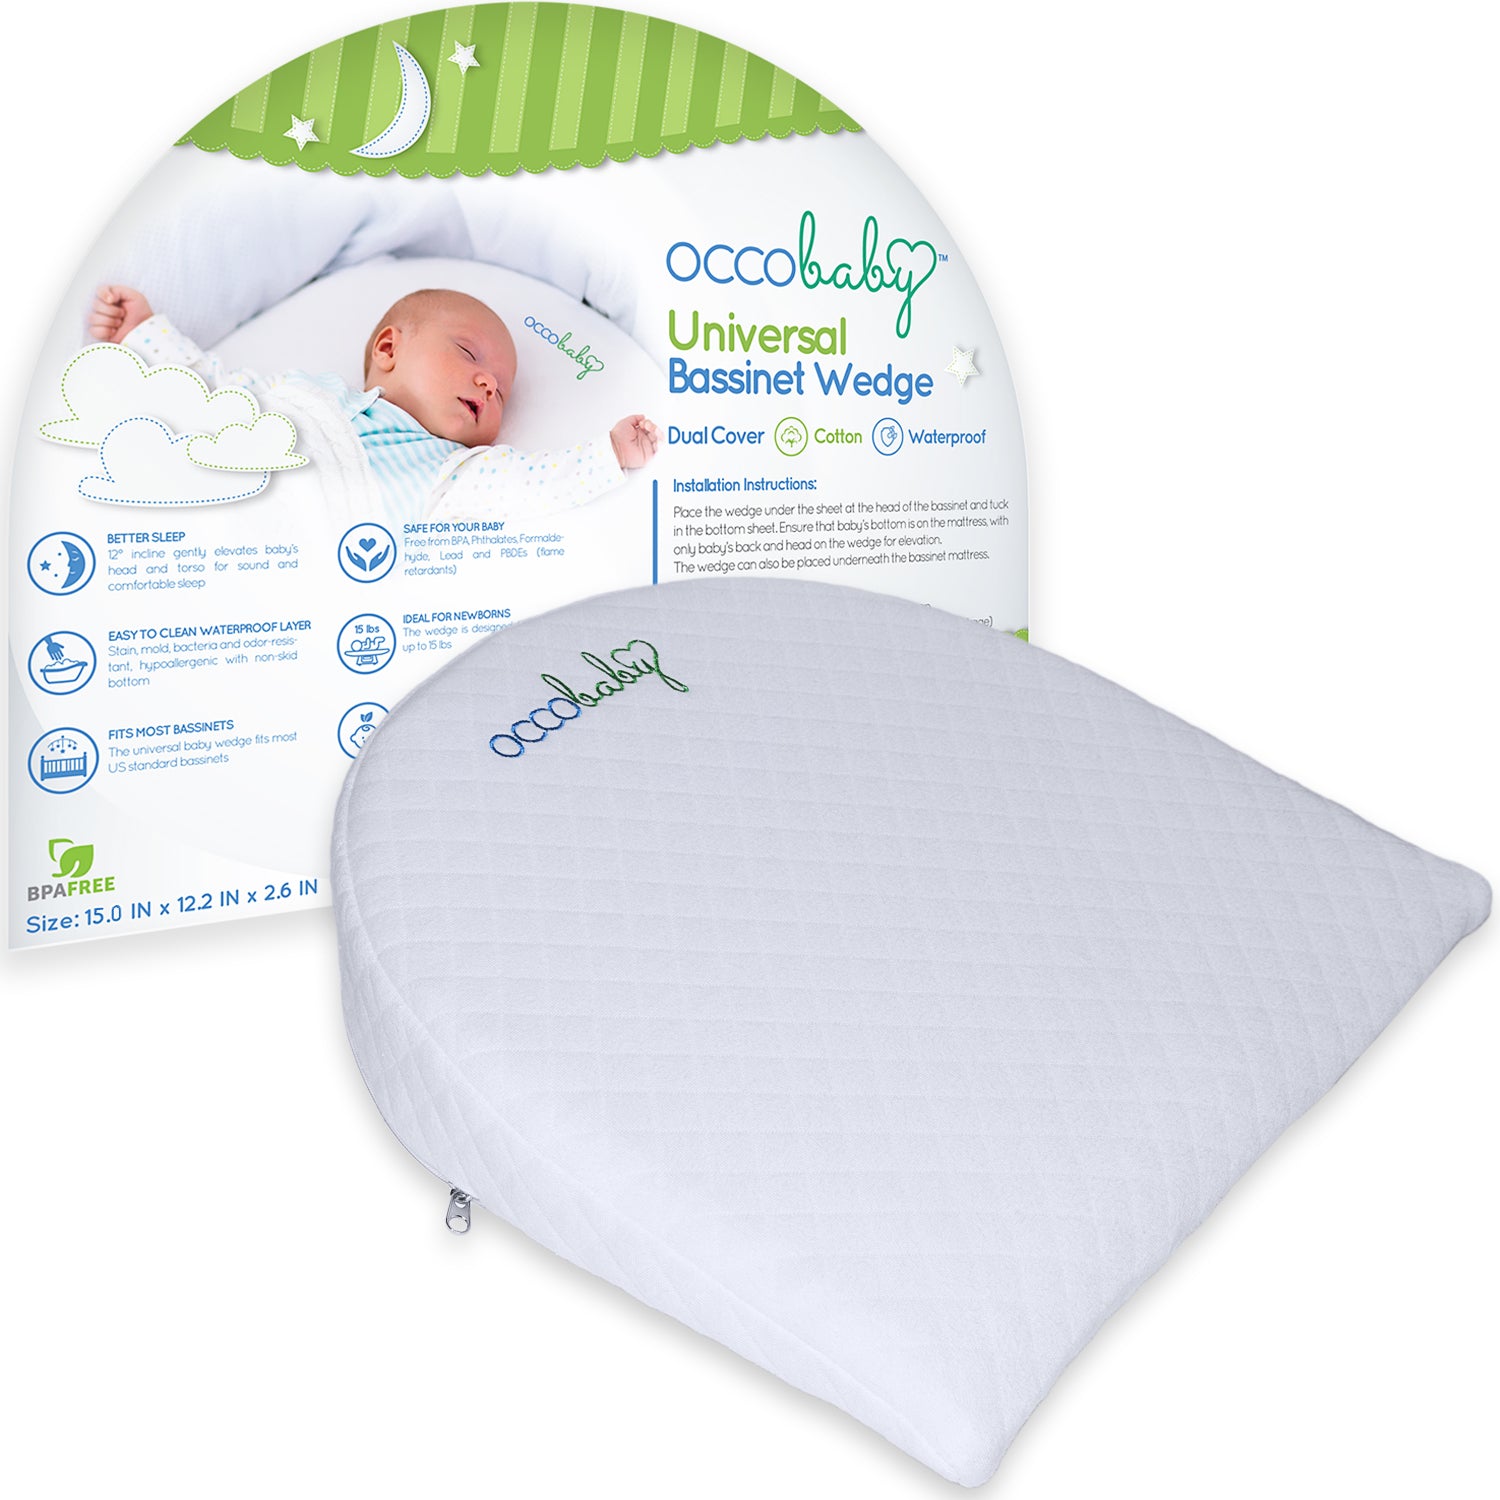 using a wedge pillow for baby